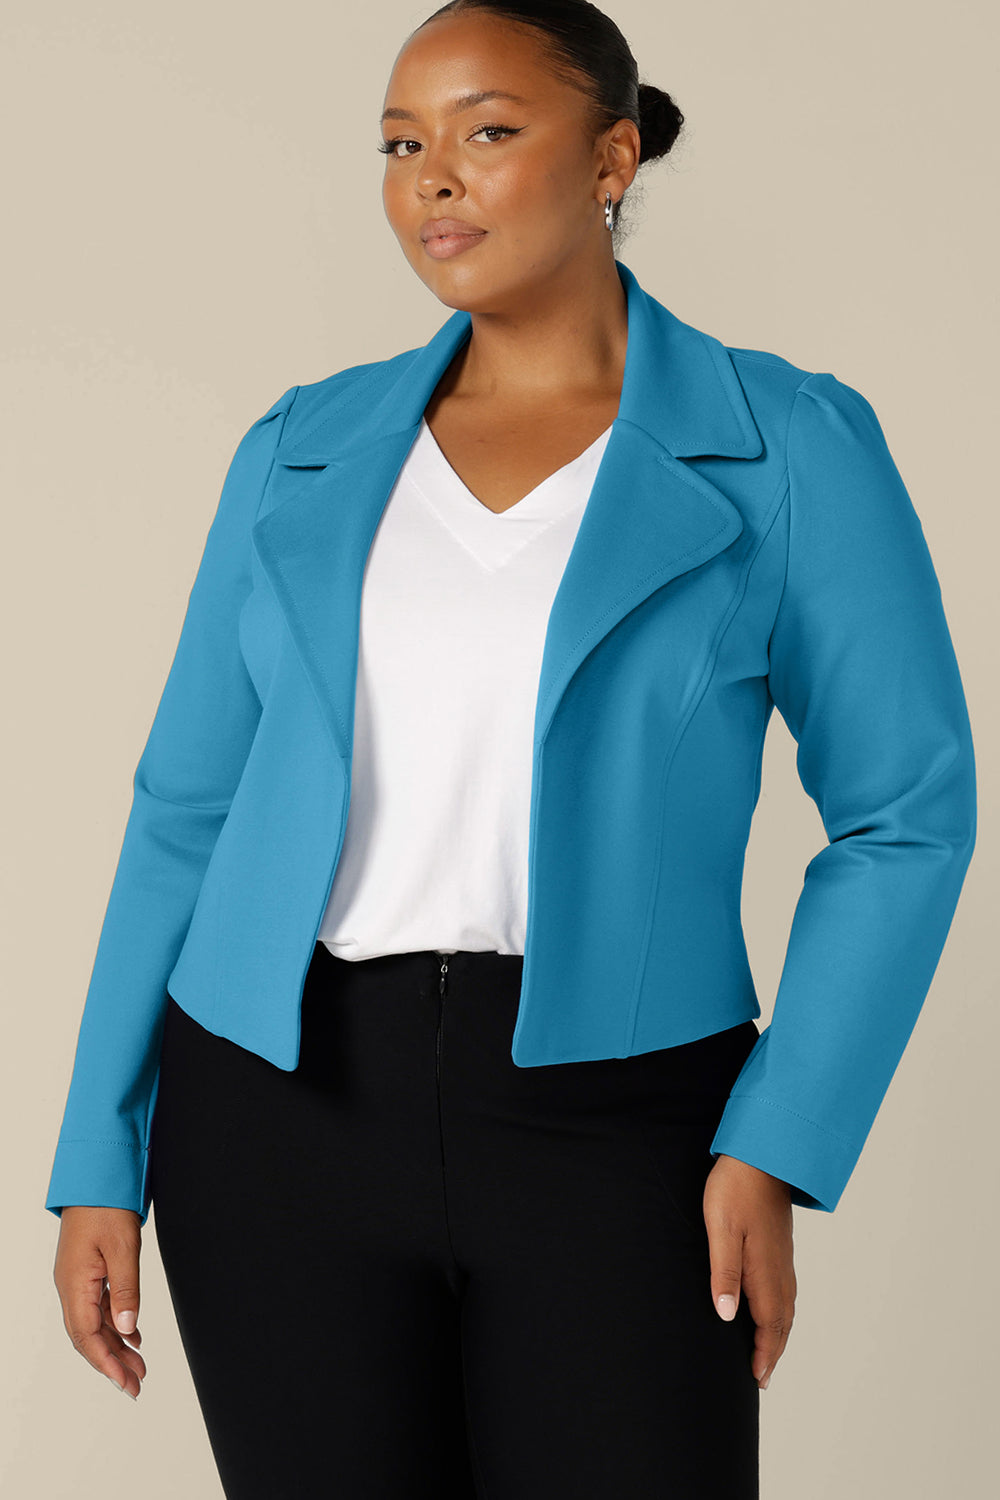 A size 18, fuller figure woman wears the Garcia Jacket in Opal blue ponte fabric by Australian and New Zealand women's clothing brand, L&F. Featuring collar and notch lapels and long sleeves, this open-fronted jacket is good for corporate wear and casual wear.